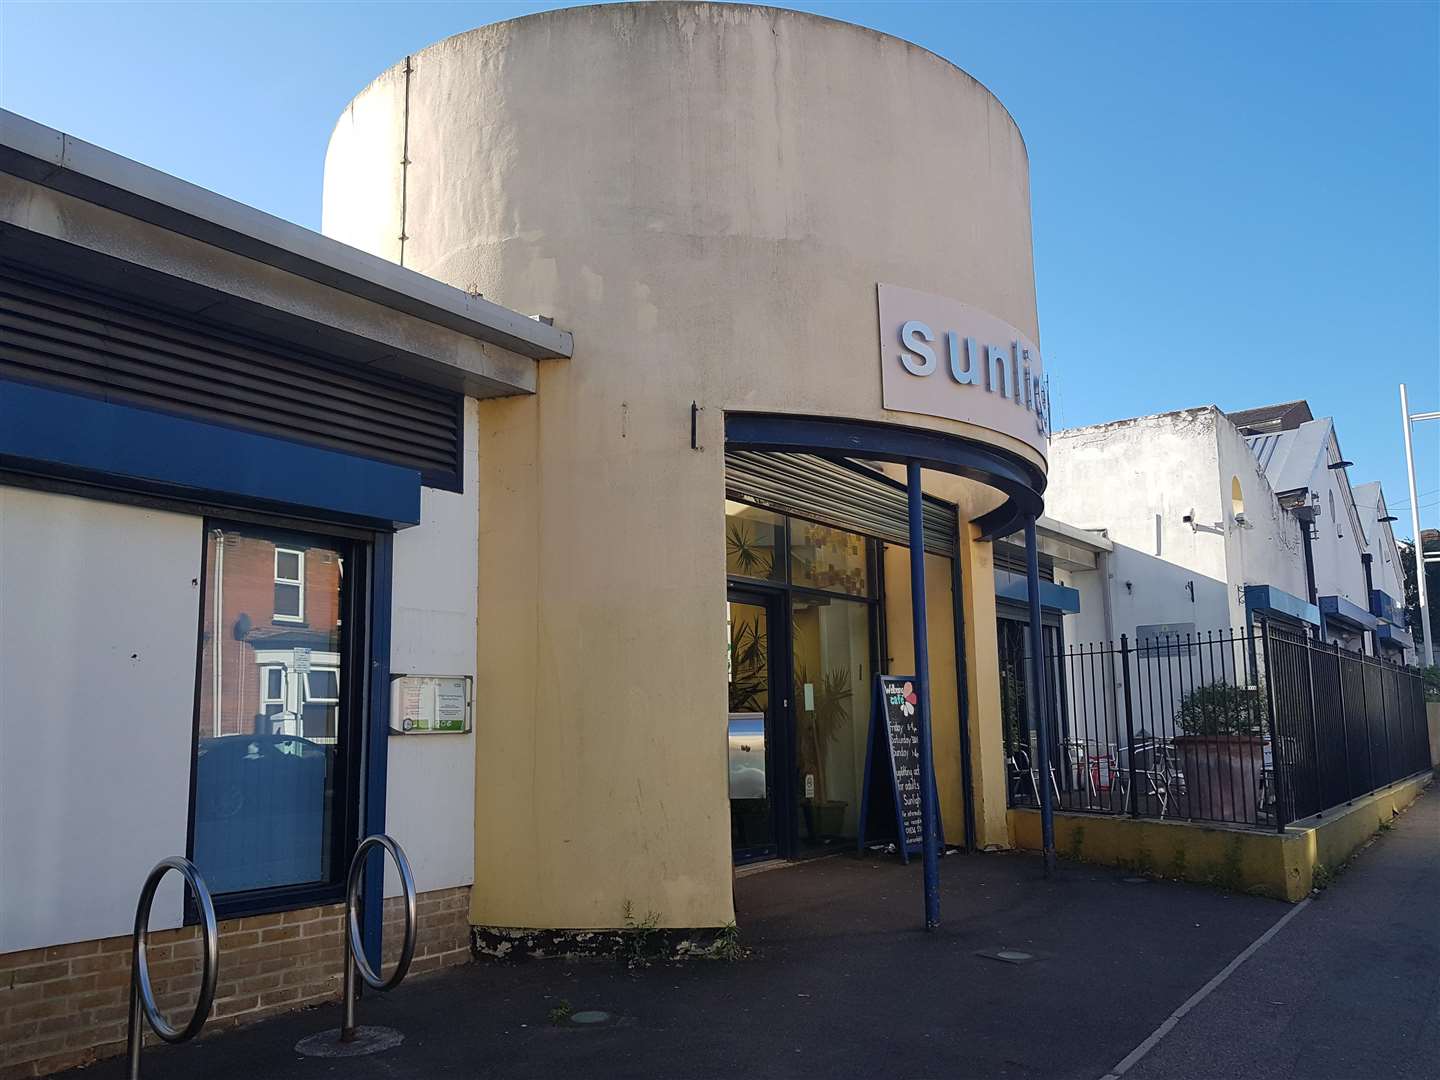 The surgery at the Sunlight Centre, in Richmond Road, Gillingham, is among those that have been saved - for now